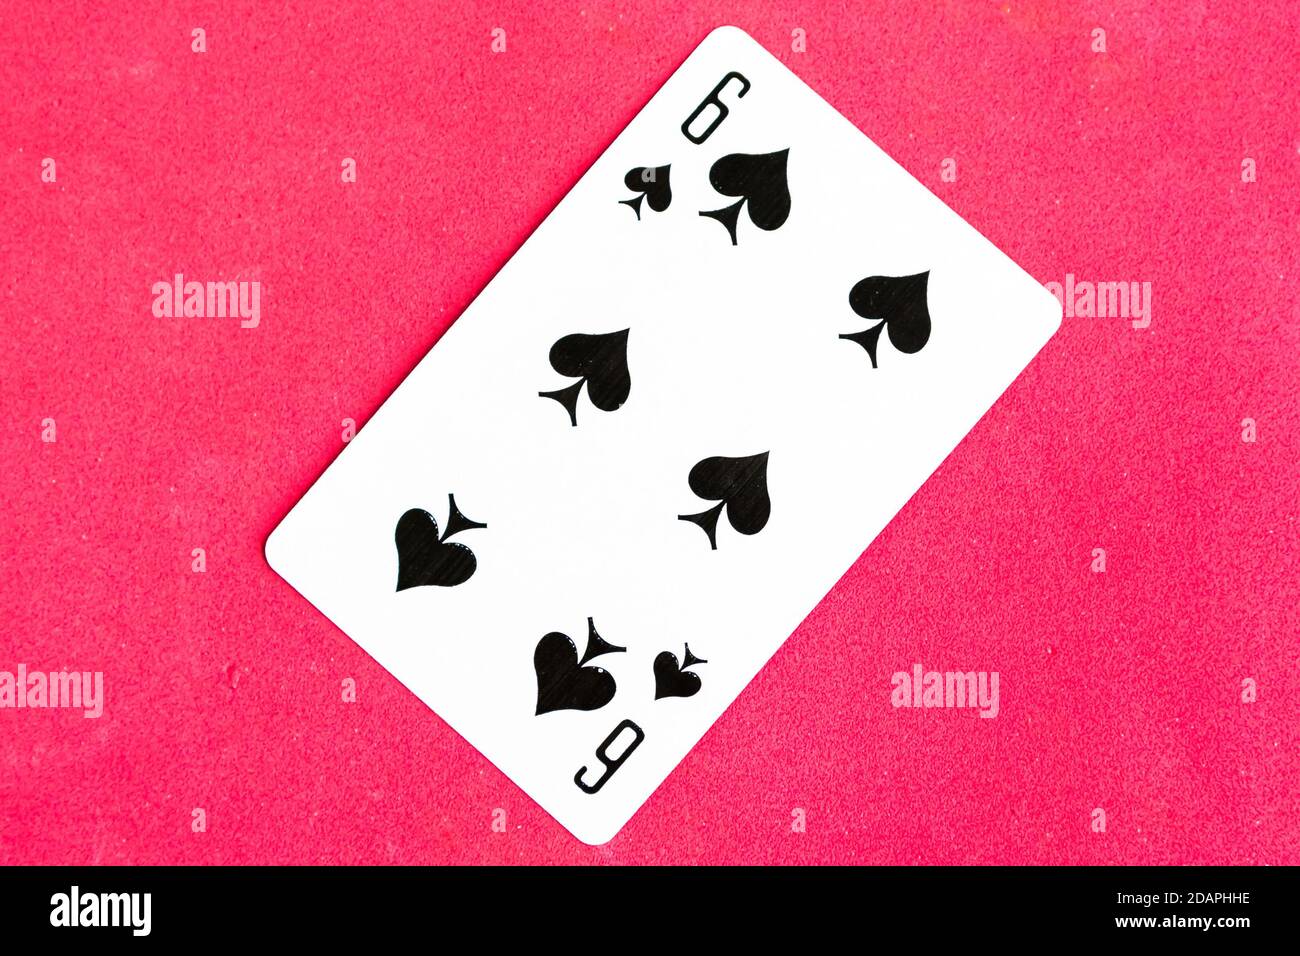 Six of Spades playing card, red background. Stock Photo